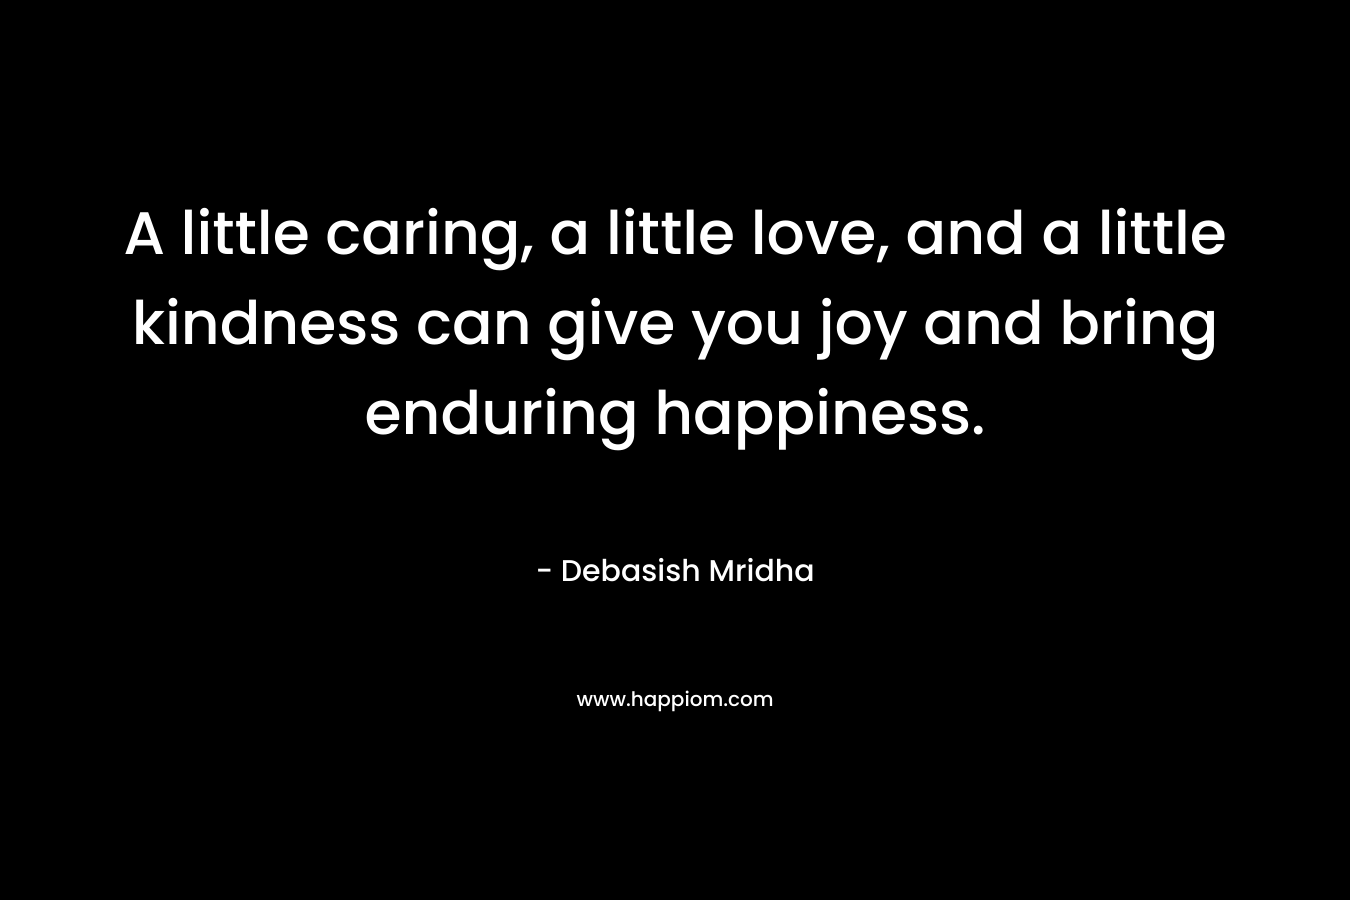 A little caring, a little love, and a little kindness can give you joy and bring enduring happiness.